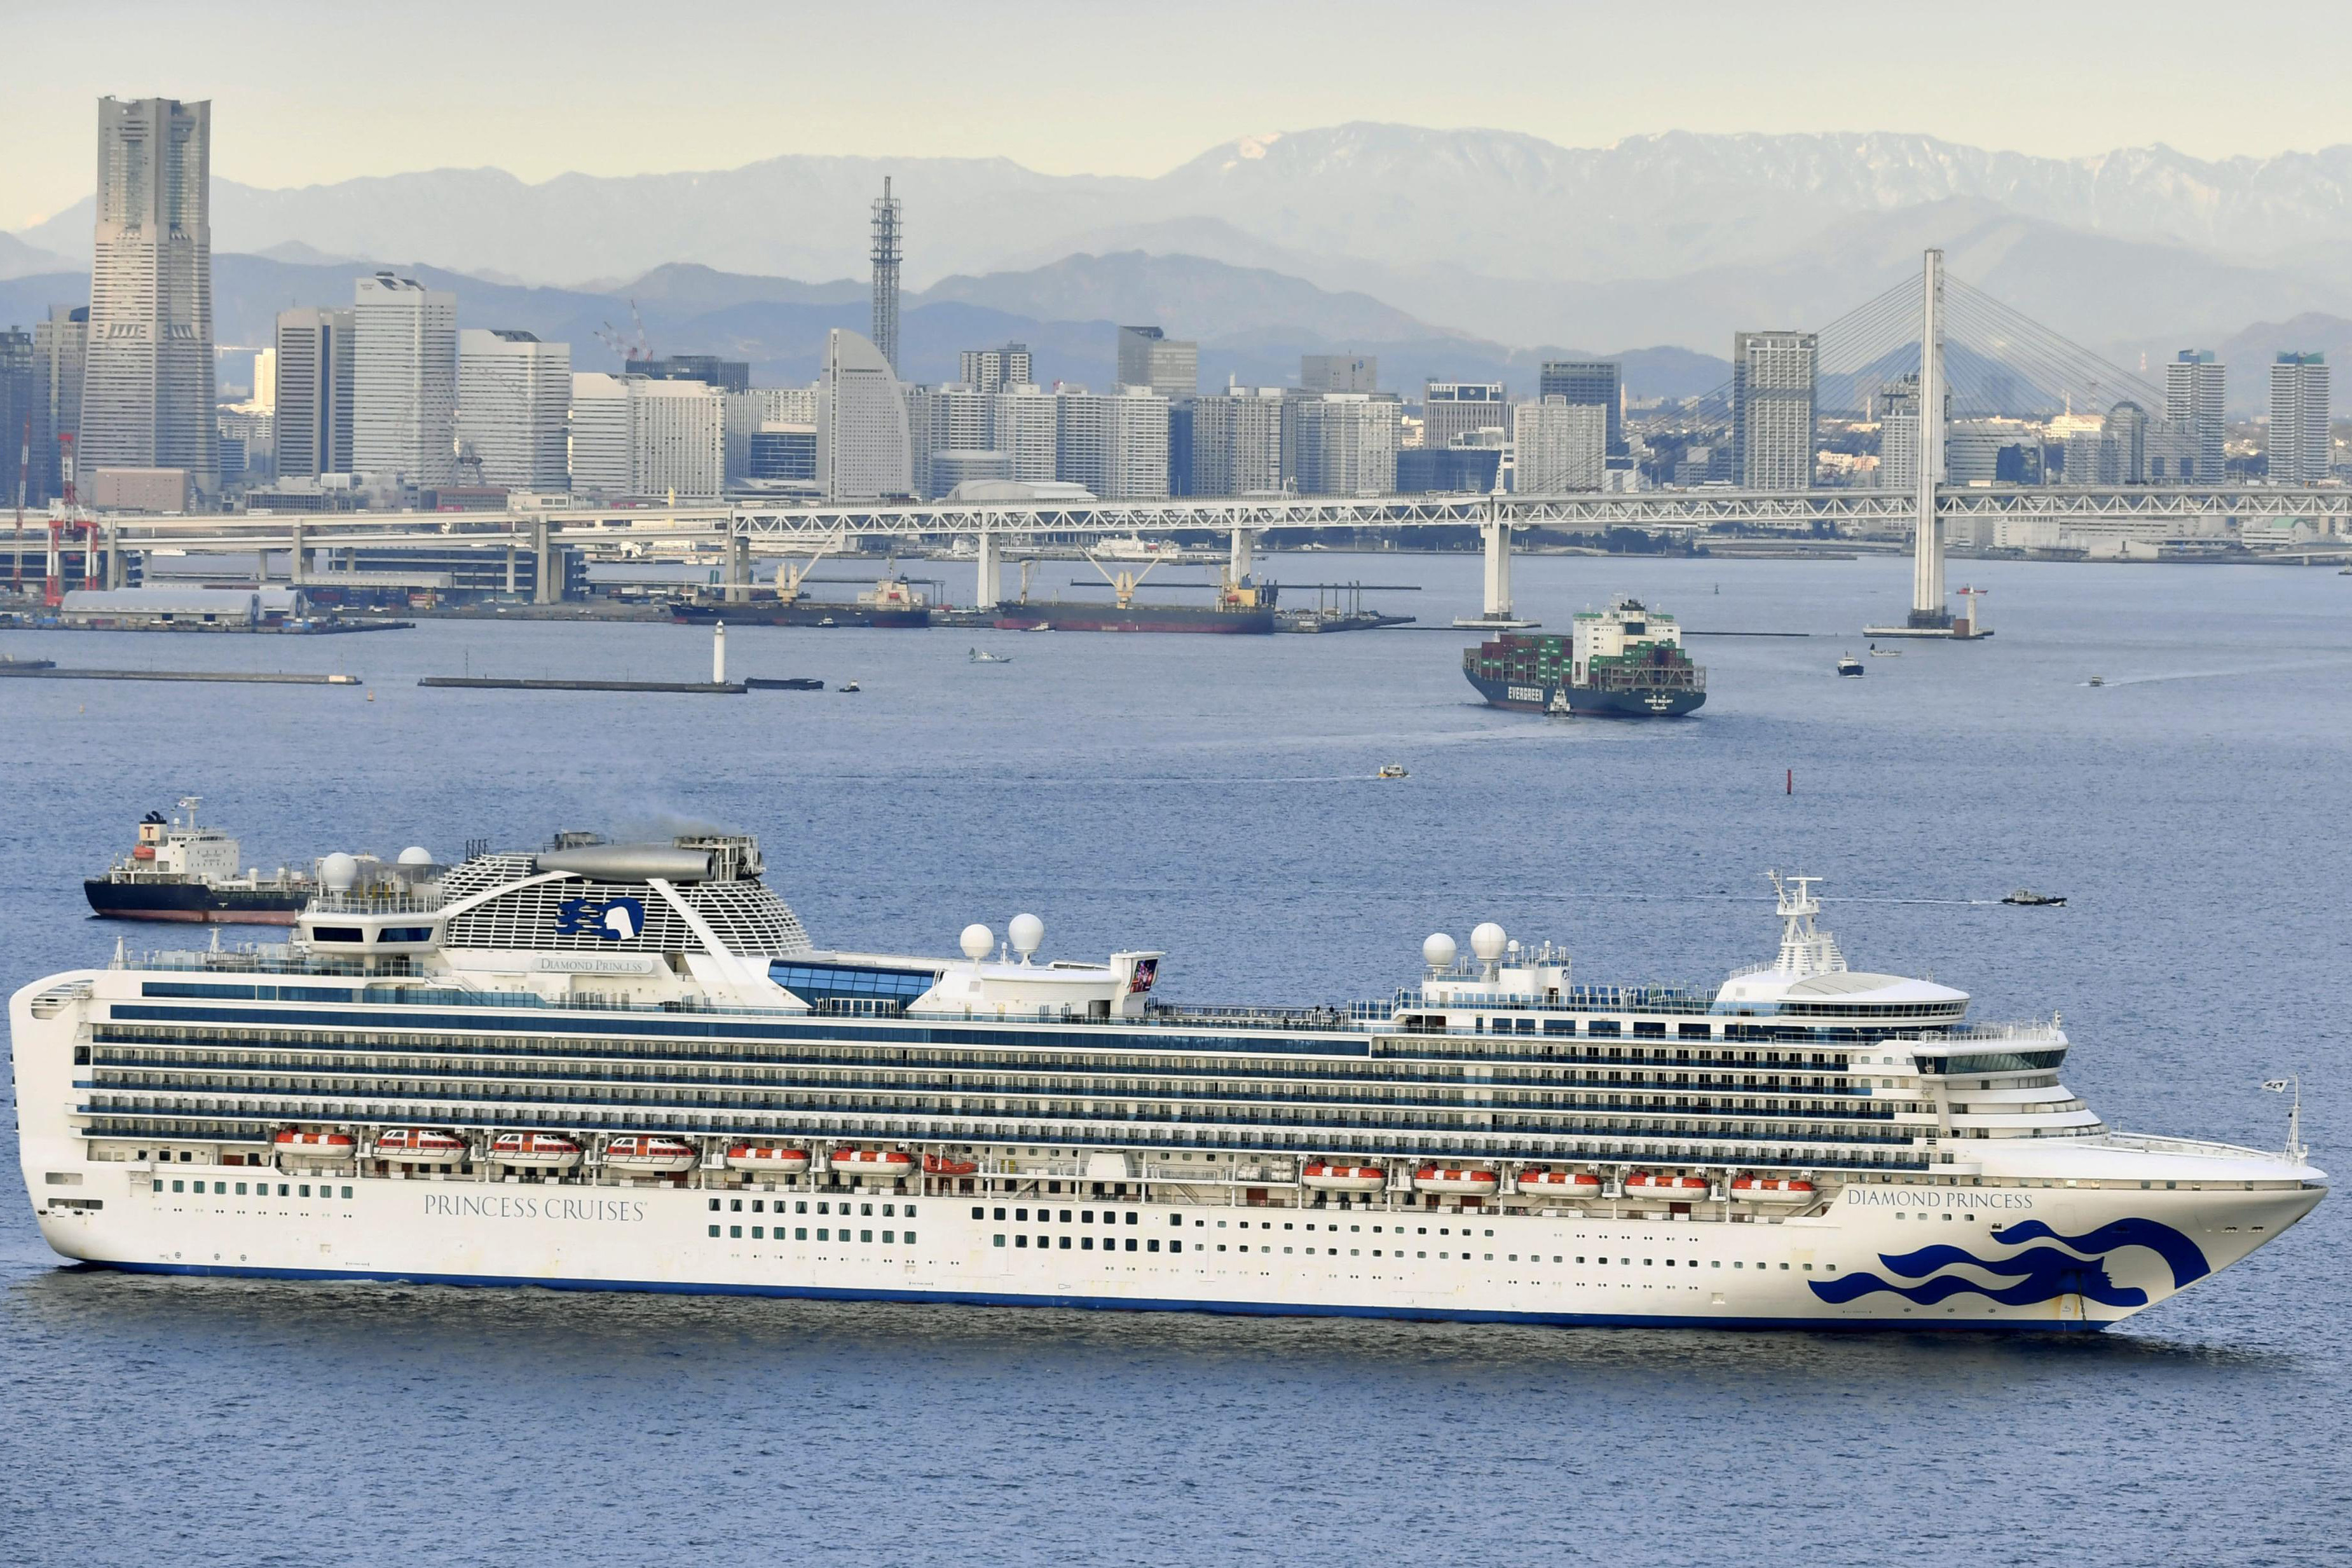 Cruise ships are renowned for the spread of infection disease due to the number of people living in an isolated place.